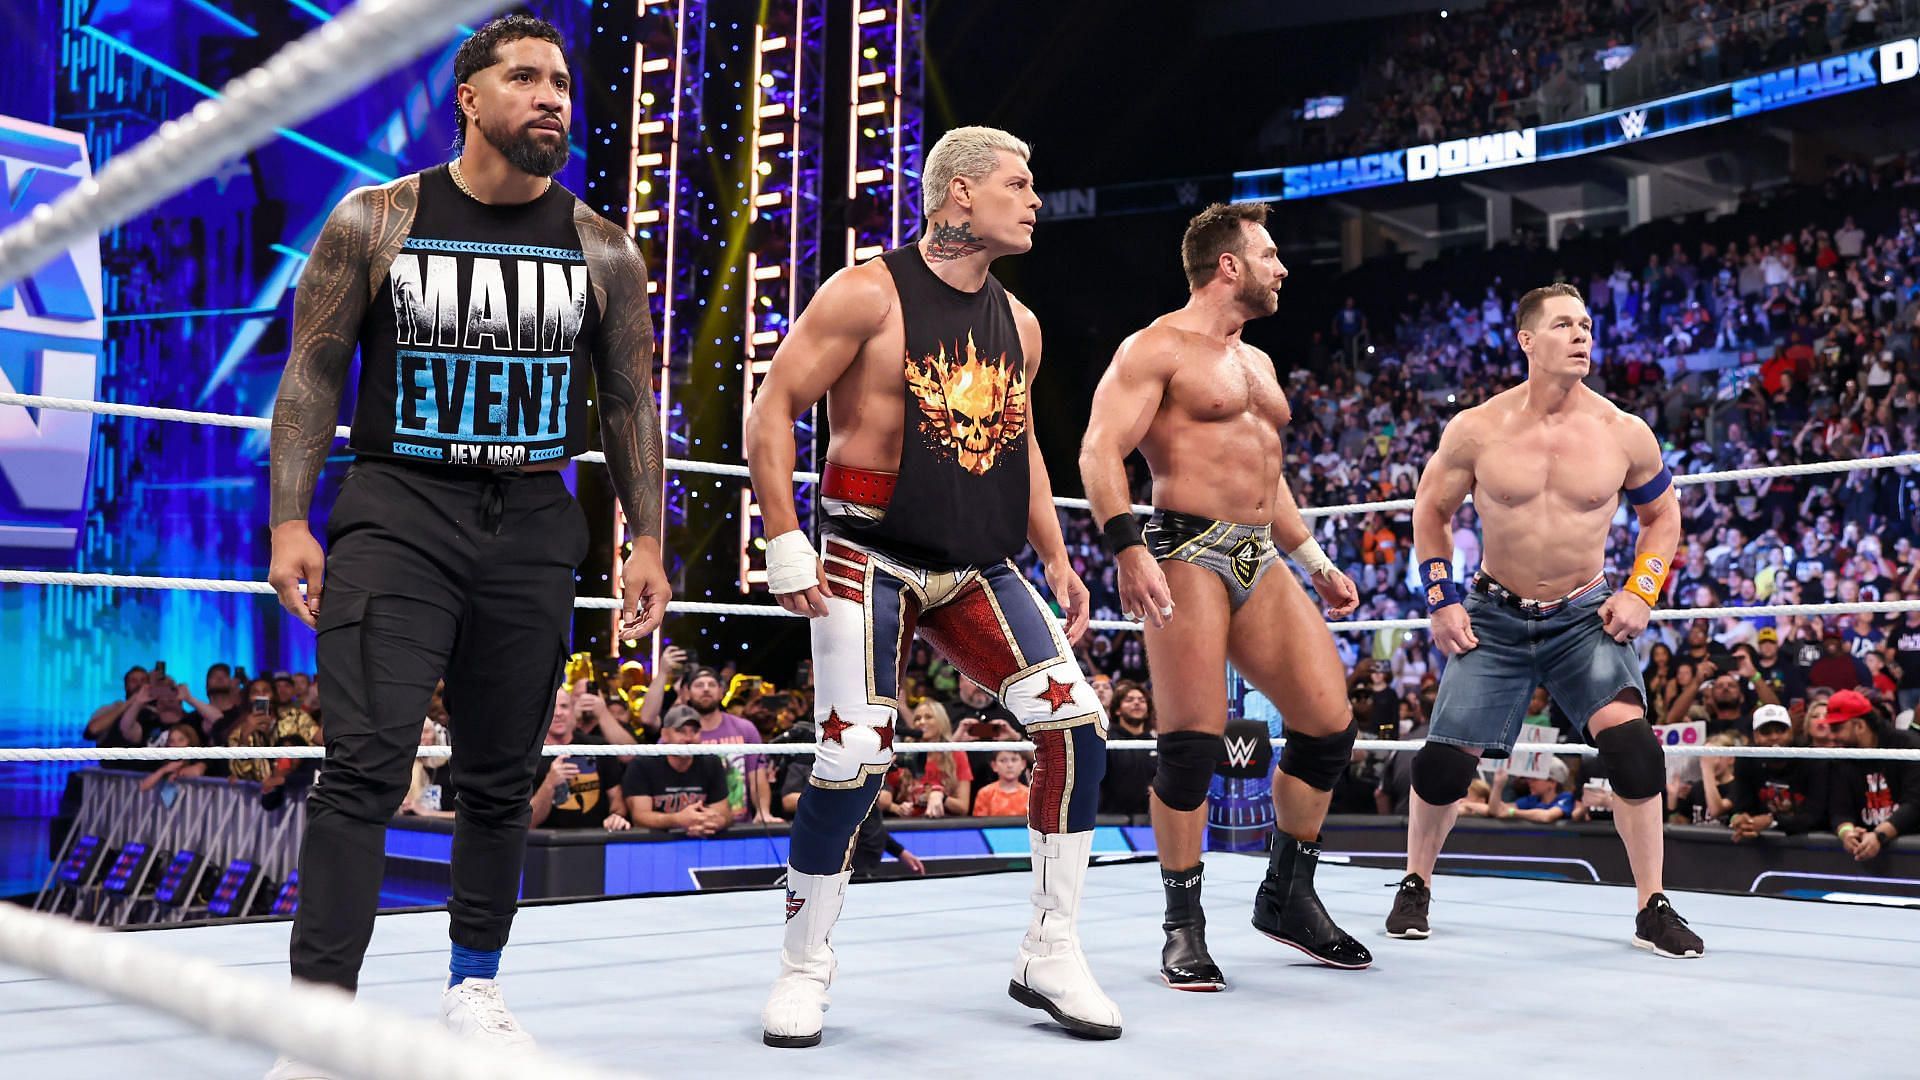 WWE fans could see the return of a top name for Survivor Series WarGames.